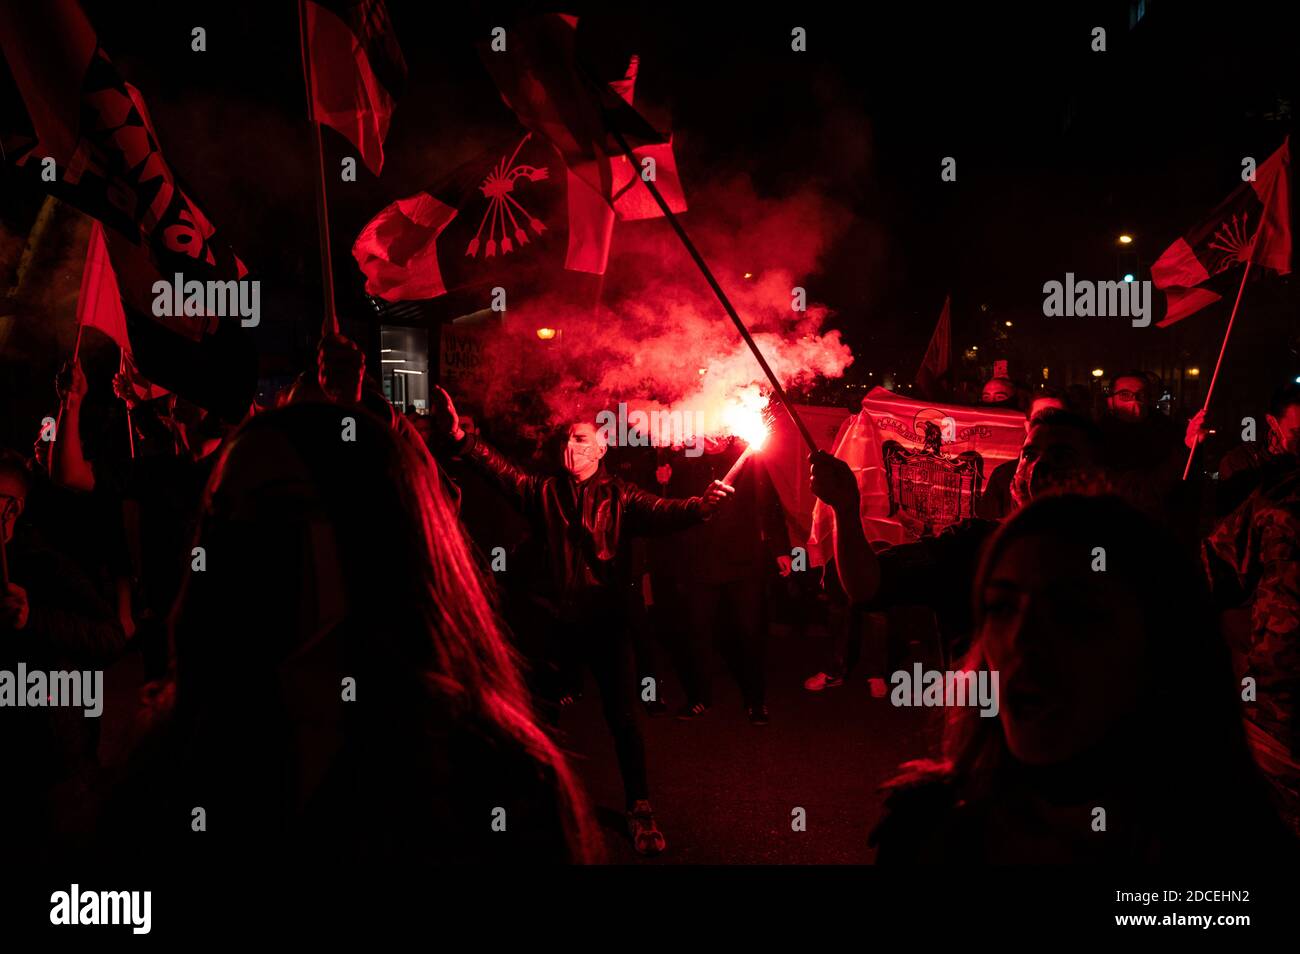 Madrid, Spain. 20th Nov, 2020. Far right wing supporter making a fascist salute carrying a flare during a rally to commemorate the death anniversary of Falange founder Jose Antonio Primo de Rivera. Credit: Marcos del Mazo/Alamy Live News Stock Photo